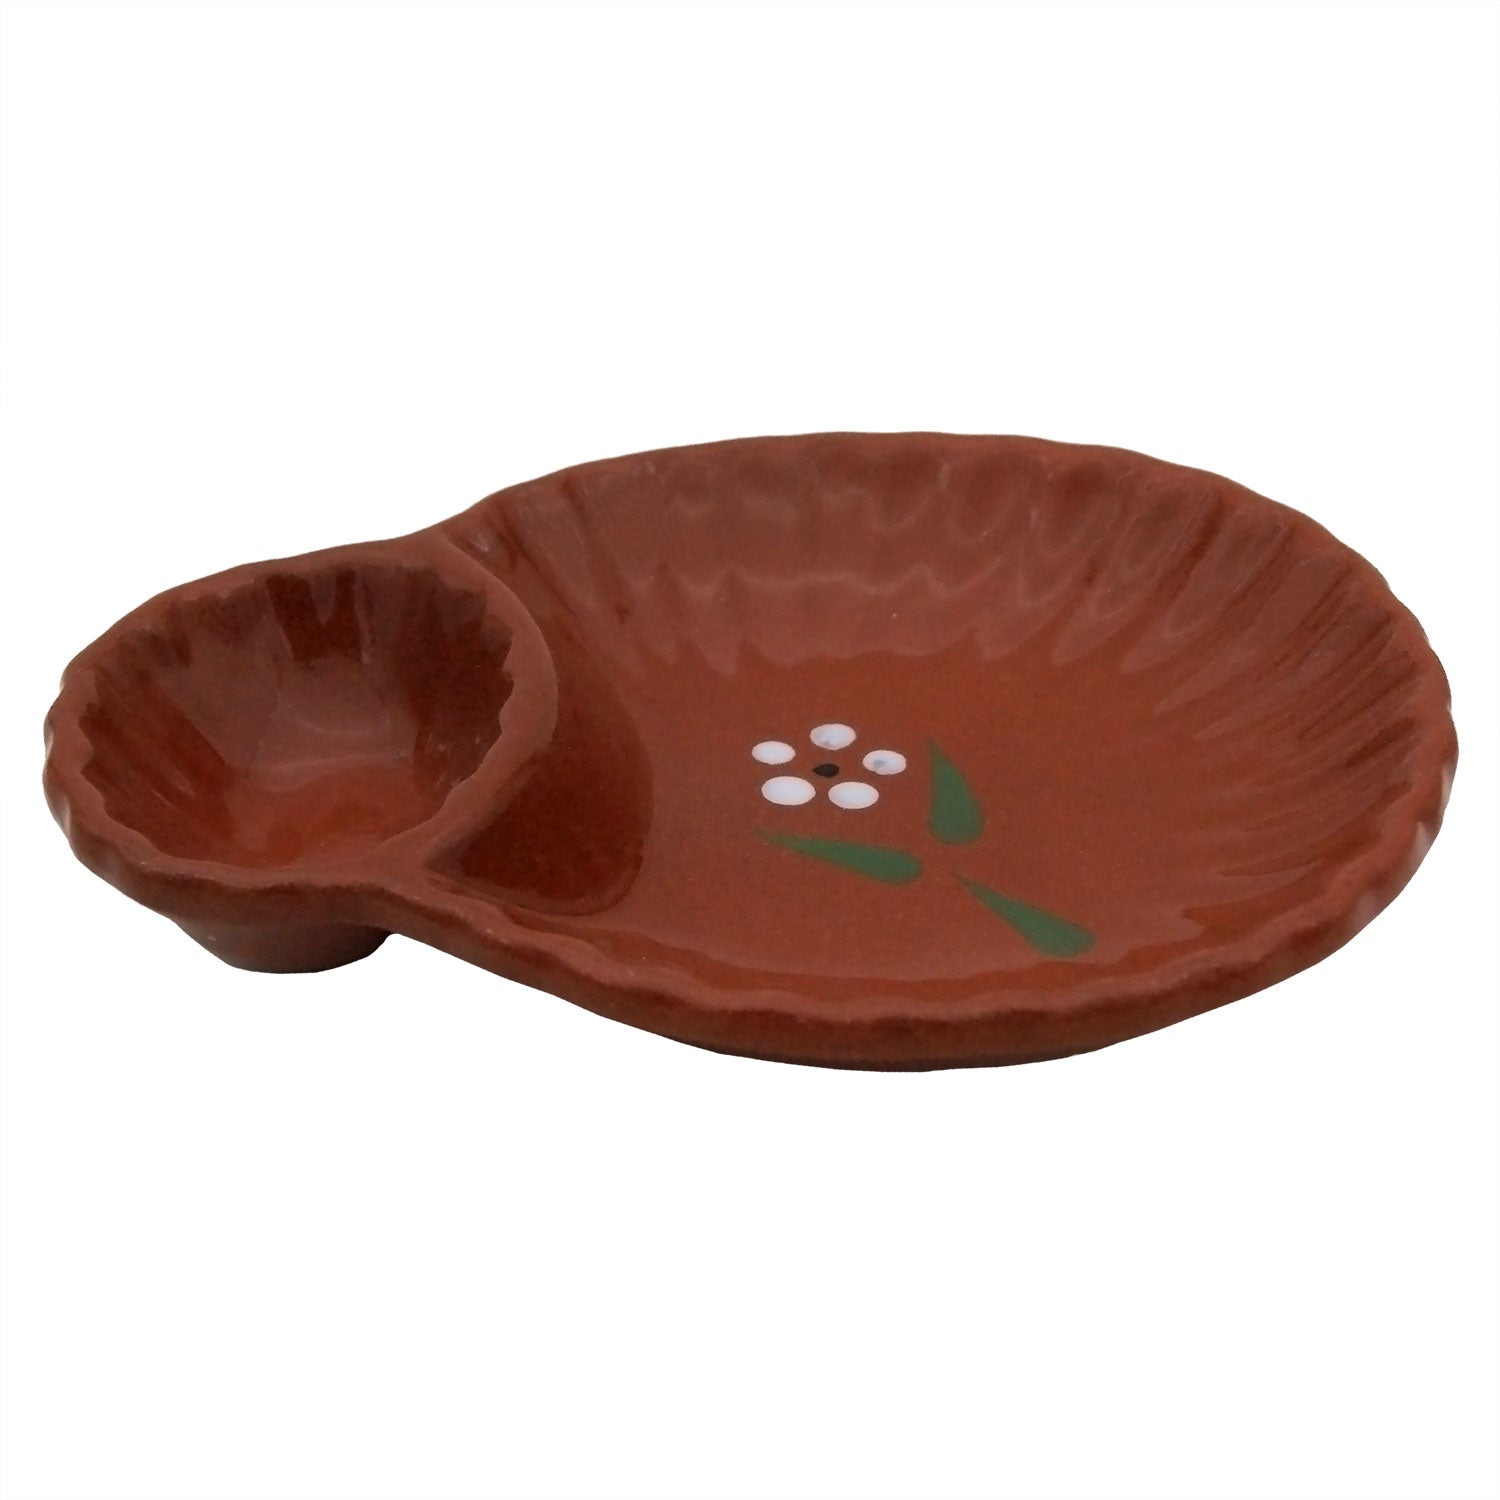 Portuguese Pottery Terracotta Clay Olive Serving Dish with Pit Holder - Set of 2